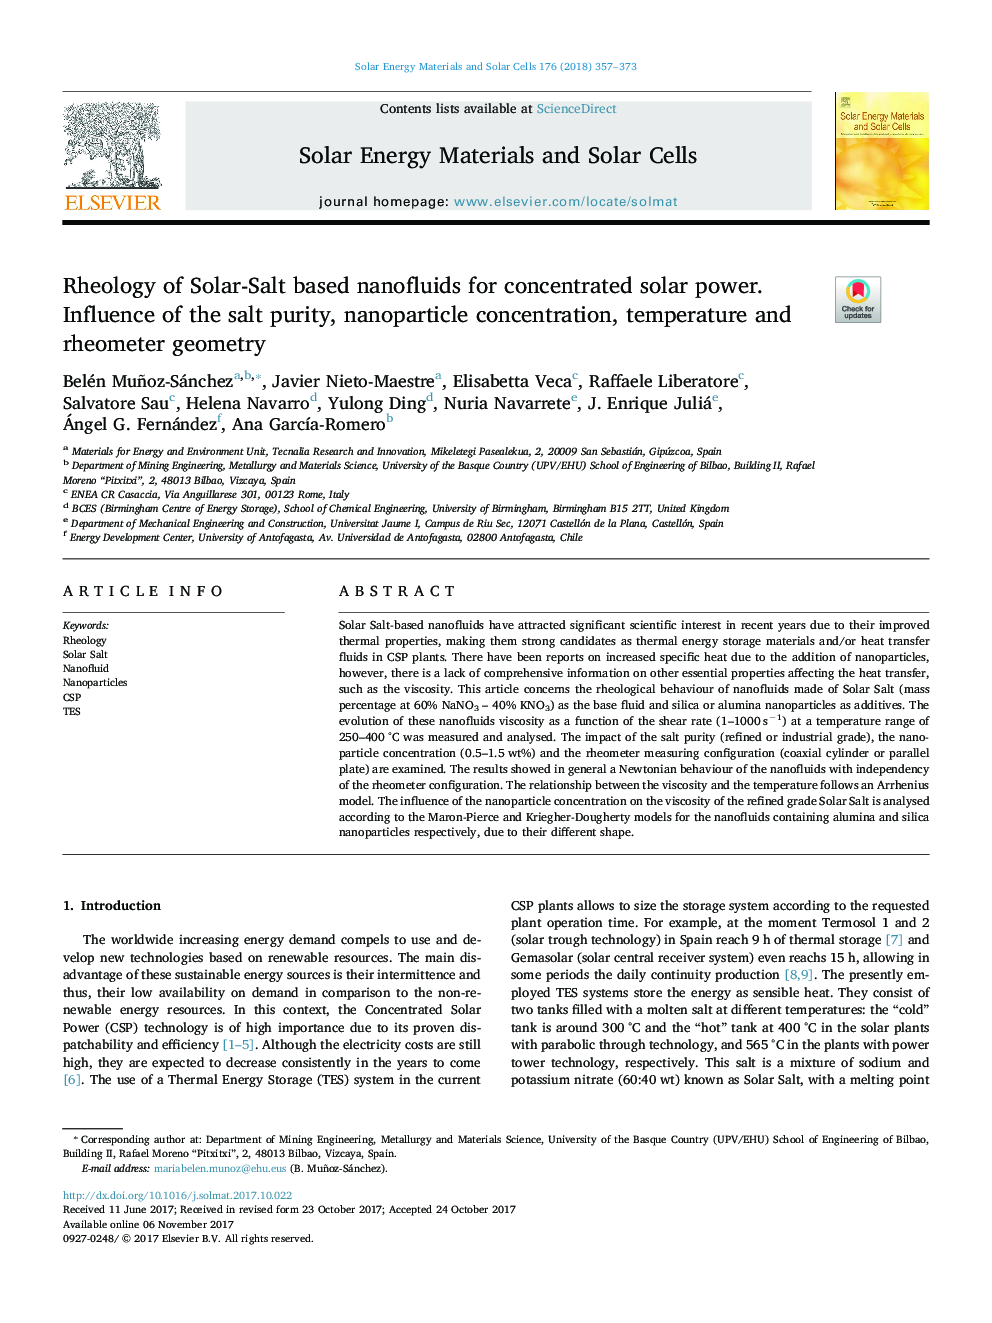 Rheology of Solar-Salt based nanofluids for concentrated solar power. Influence of the salt purity, nanoparticle concentration, temperature and rheometer geometry